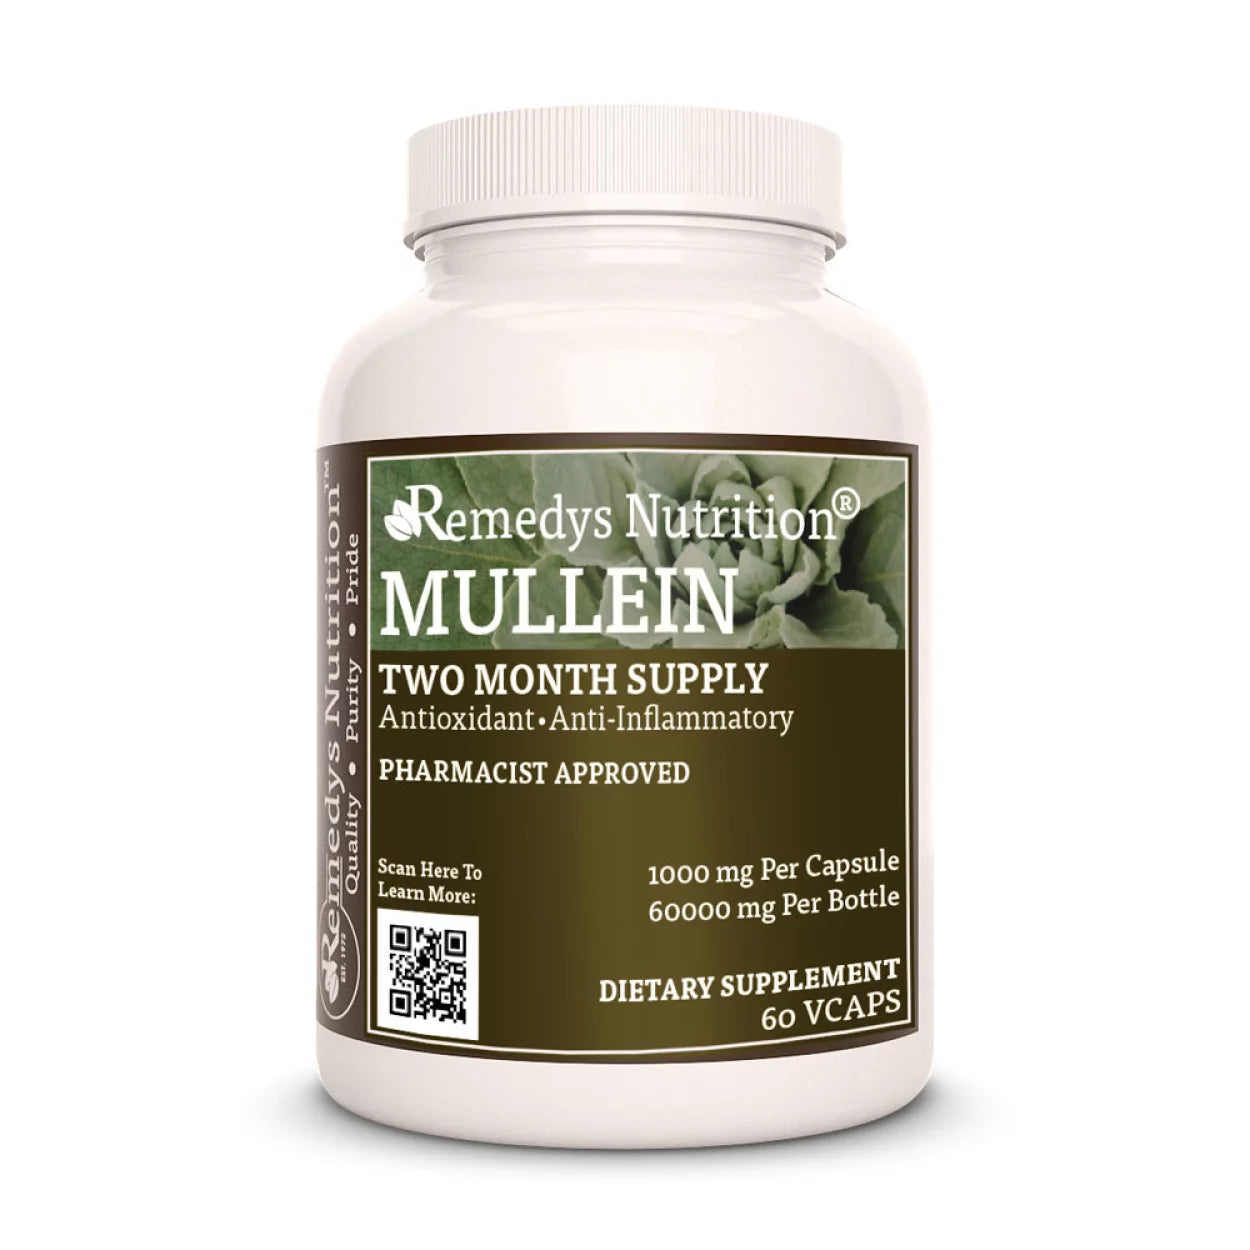 Image of Remedy's Nutrition® Mullein Leaf Capsules Herbal Dietary Supplement front bottle. Made in the USA.